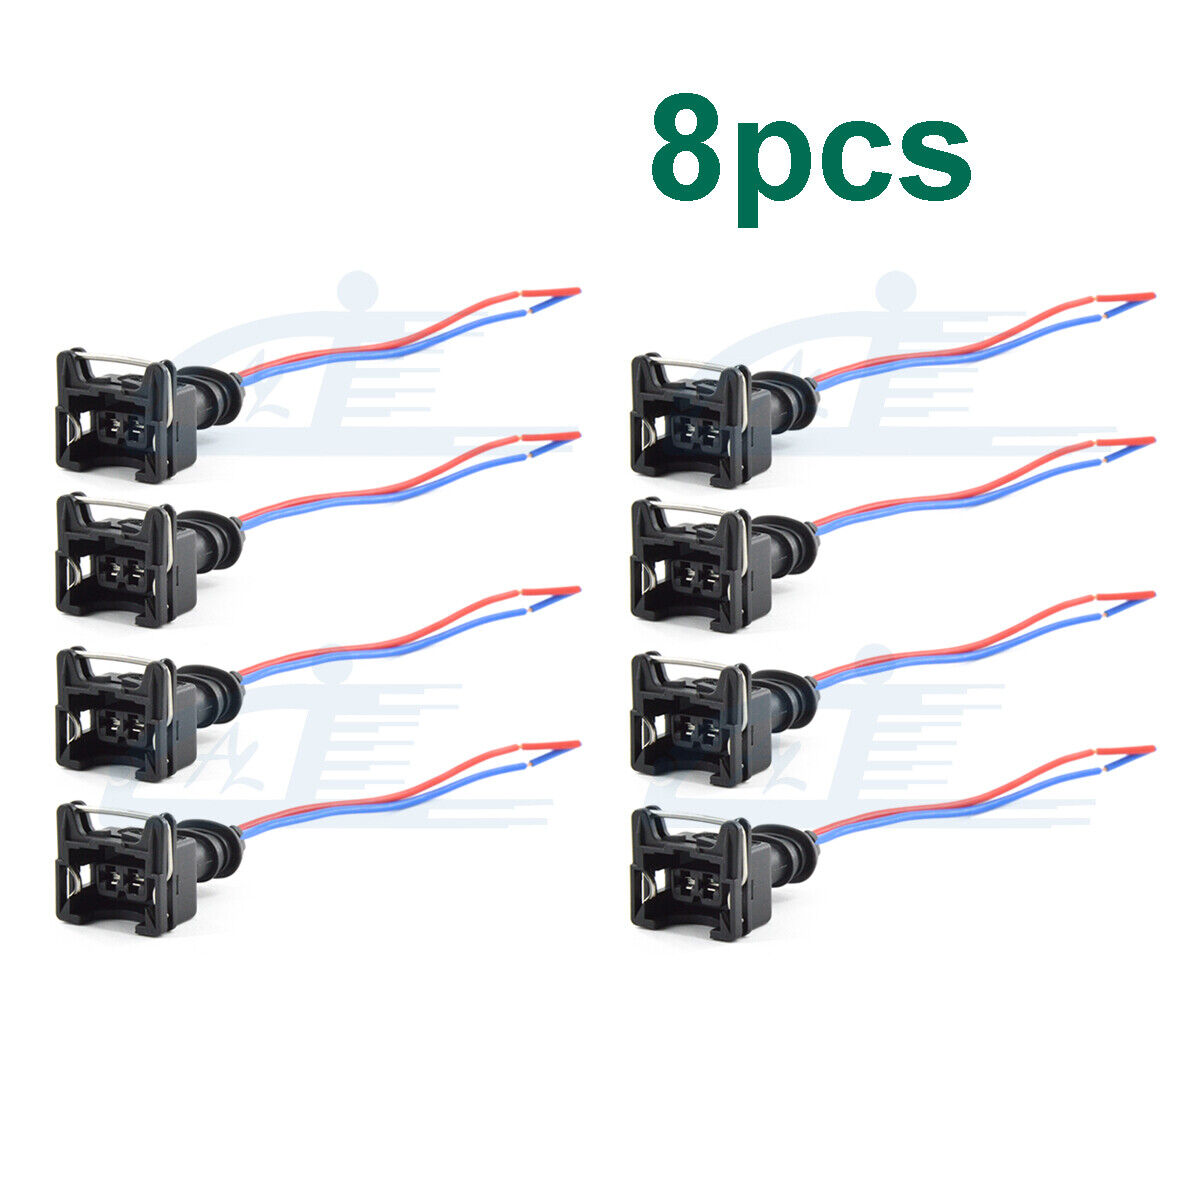 8 x Fuel Injector Connector Wiring Plugs Clips Fit EV1 OBD1 Pigtail Cut & Splice